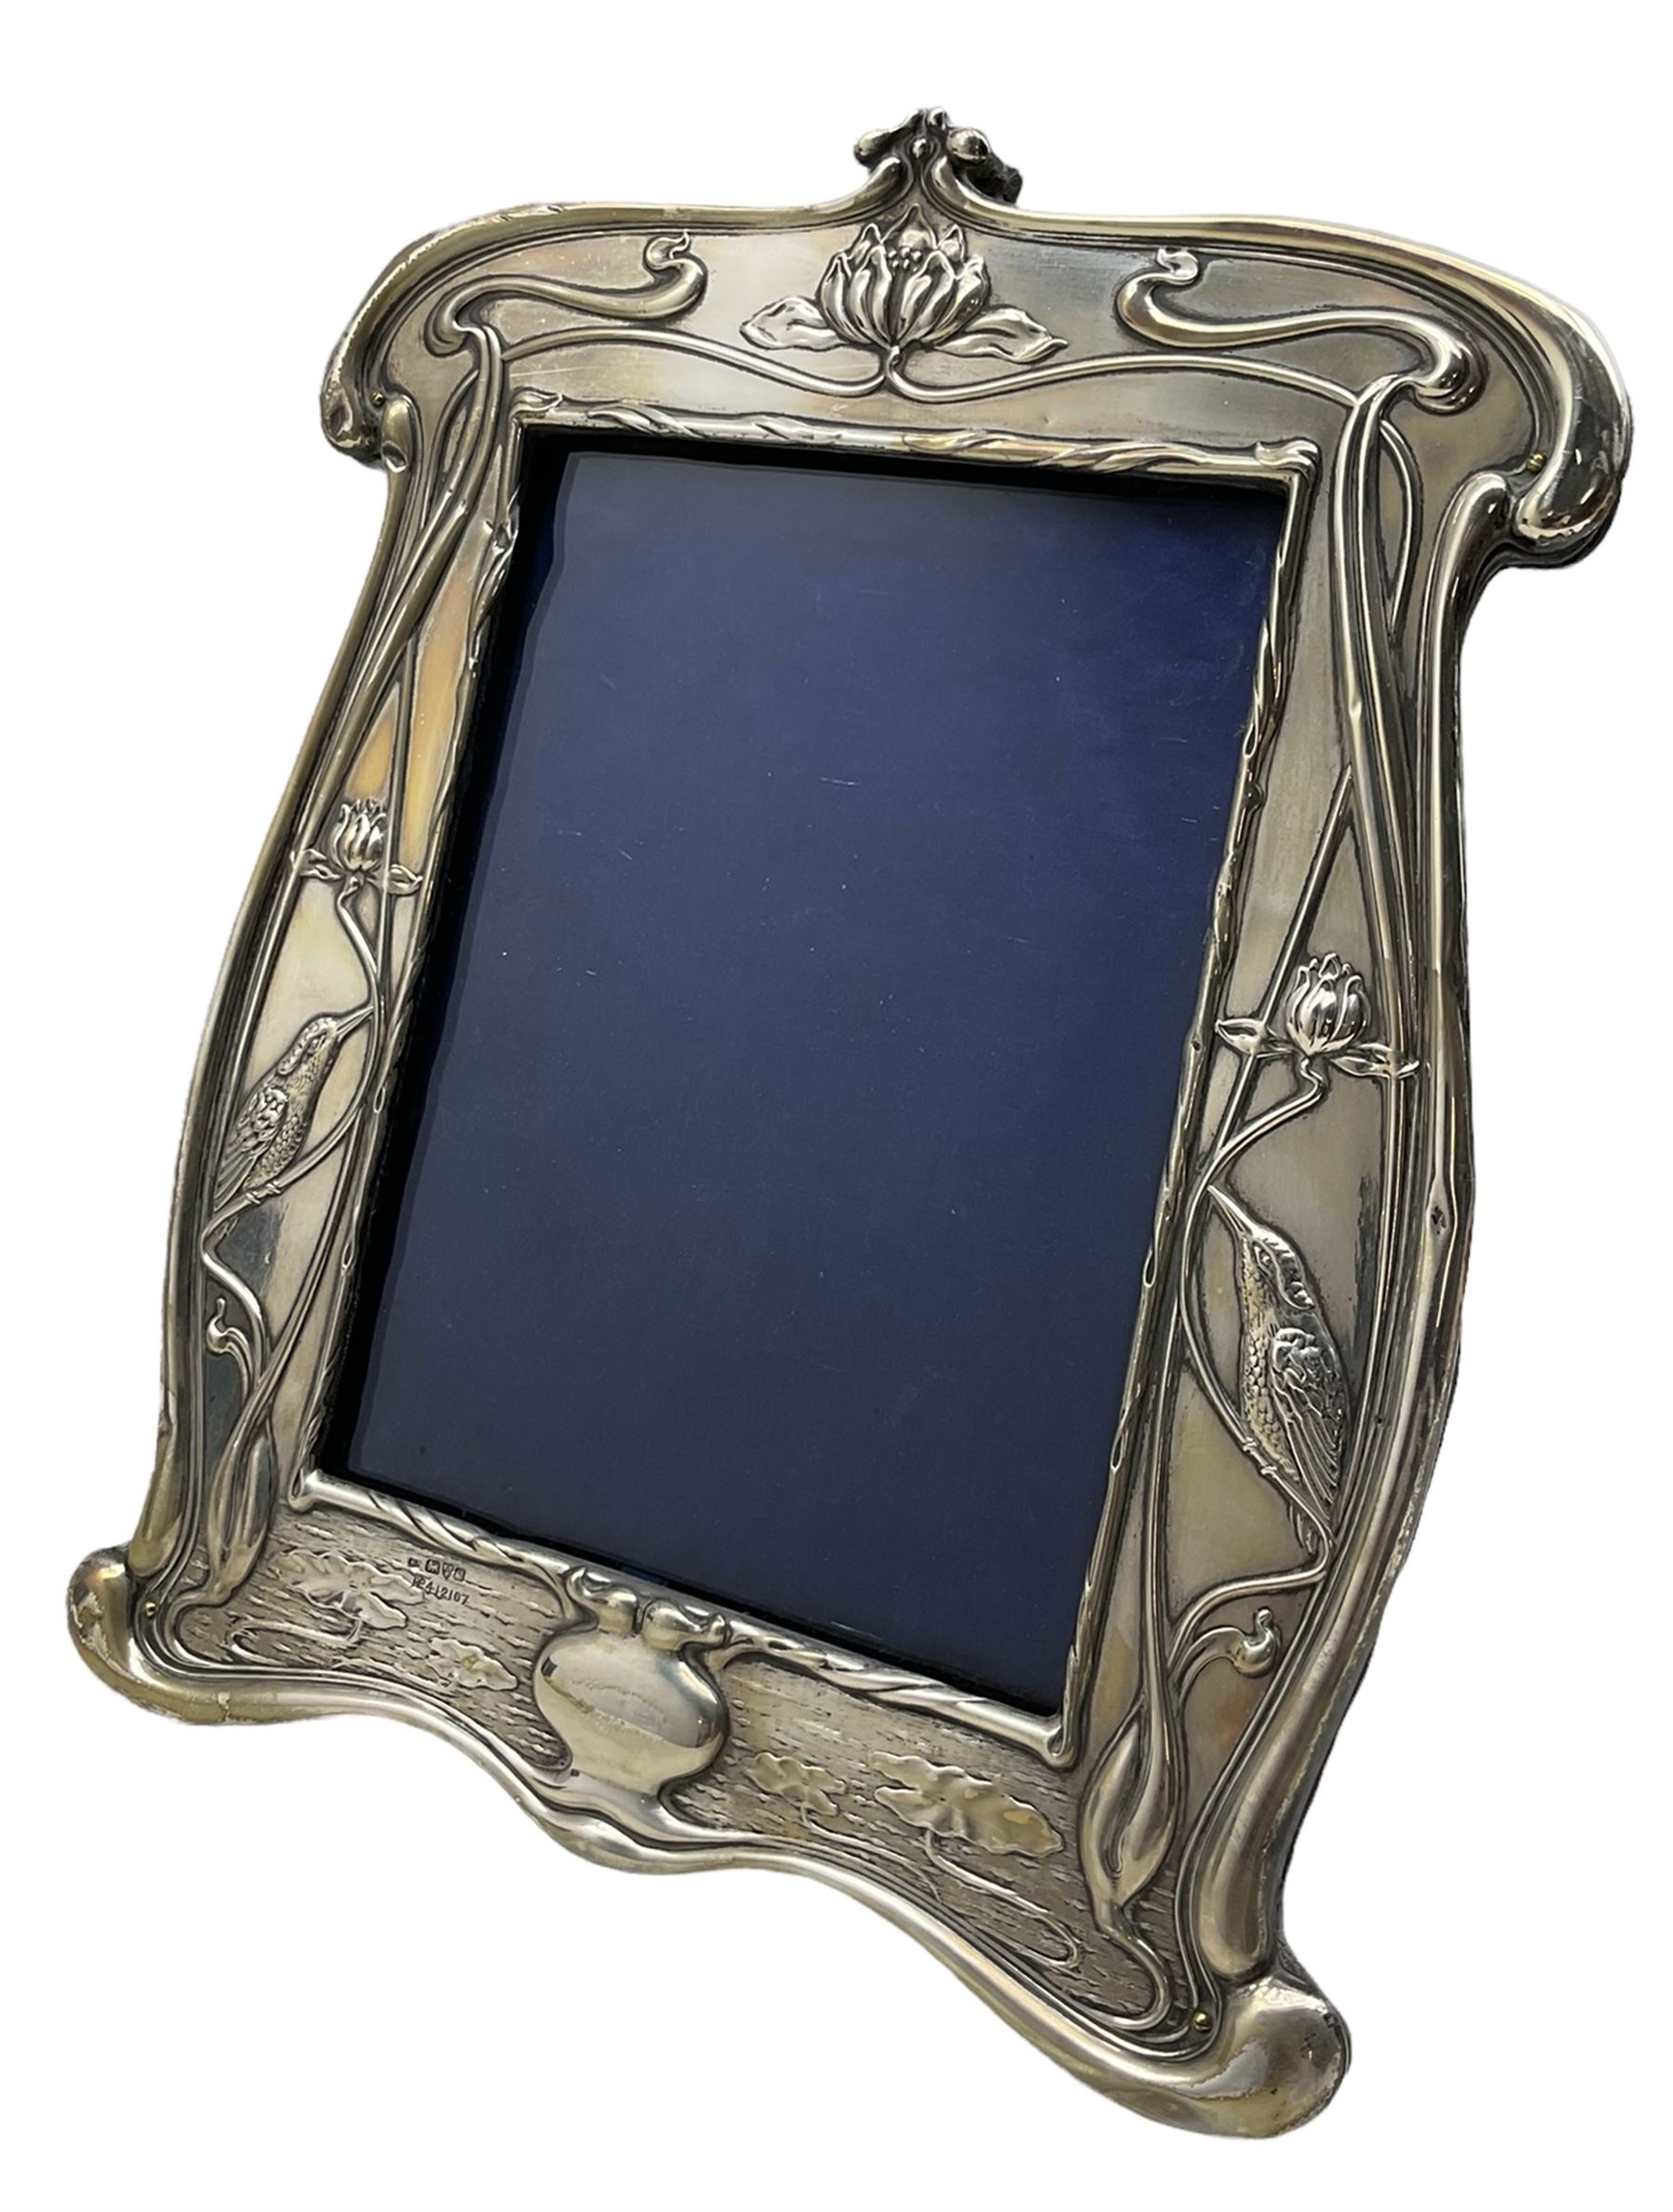 Edwardian Art Nouveau silver photograph frame with birds on flowering branches - Image 2 of 5